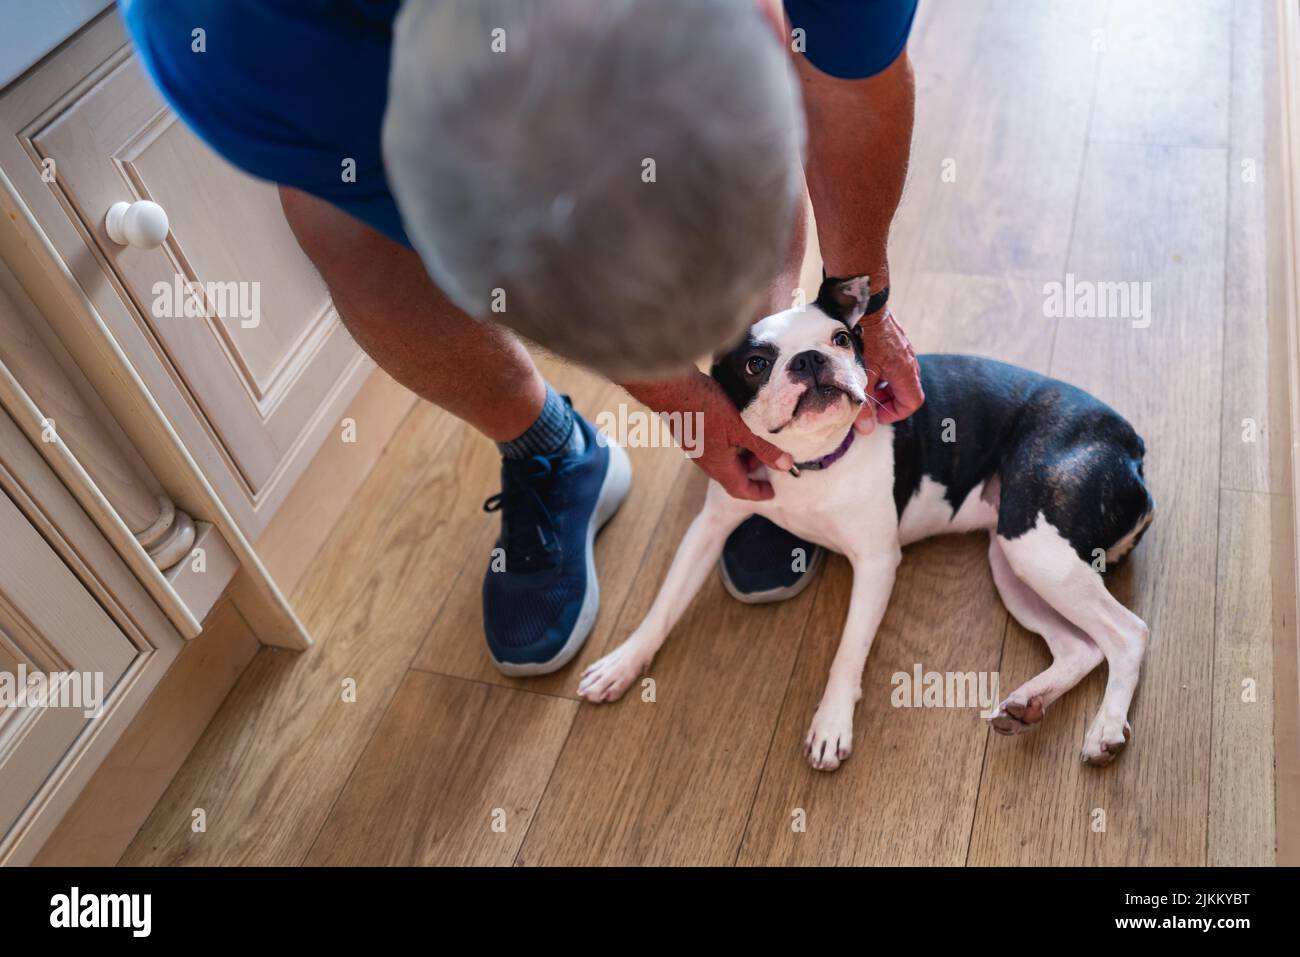 Boston Terrier dog being fussed by a man bending down to the dog who is at his feet on a wooden floor. The dog is looking up at the man. Stock Photo